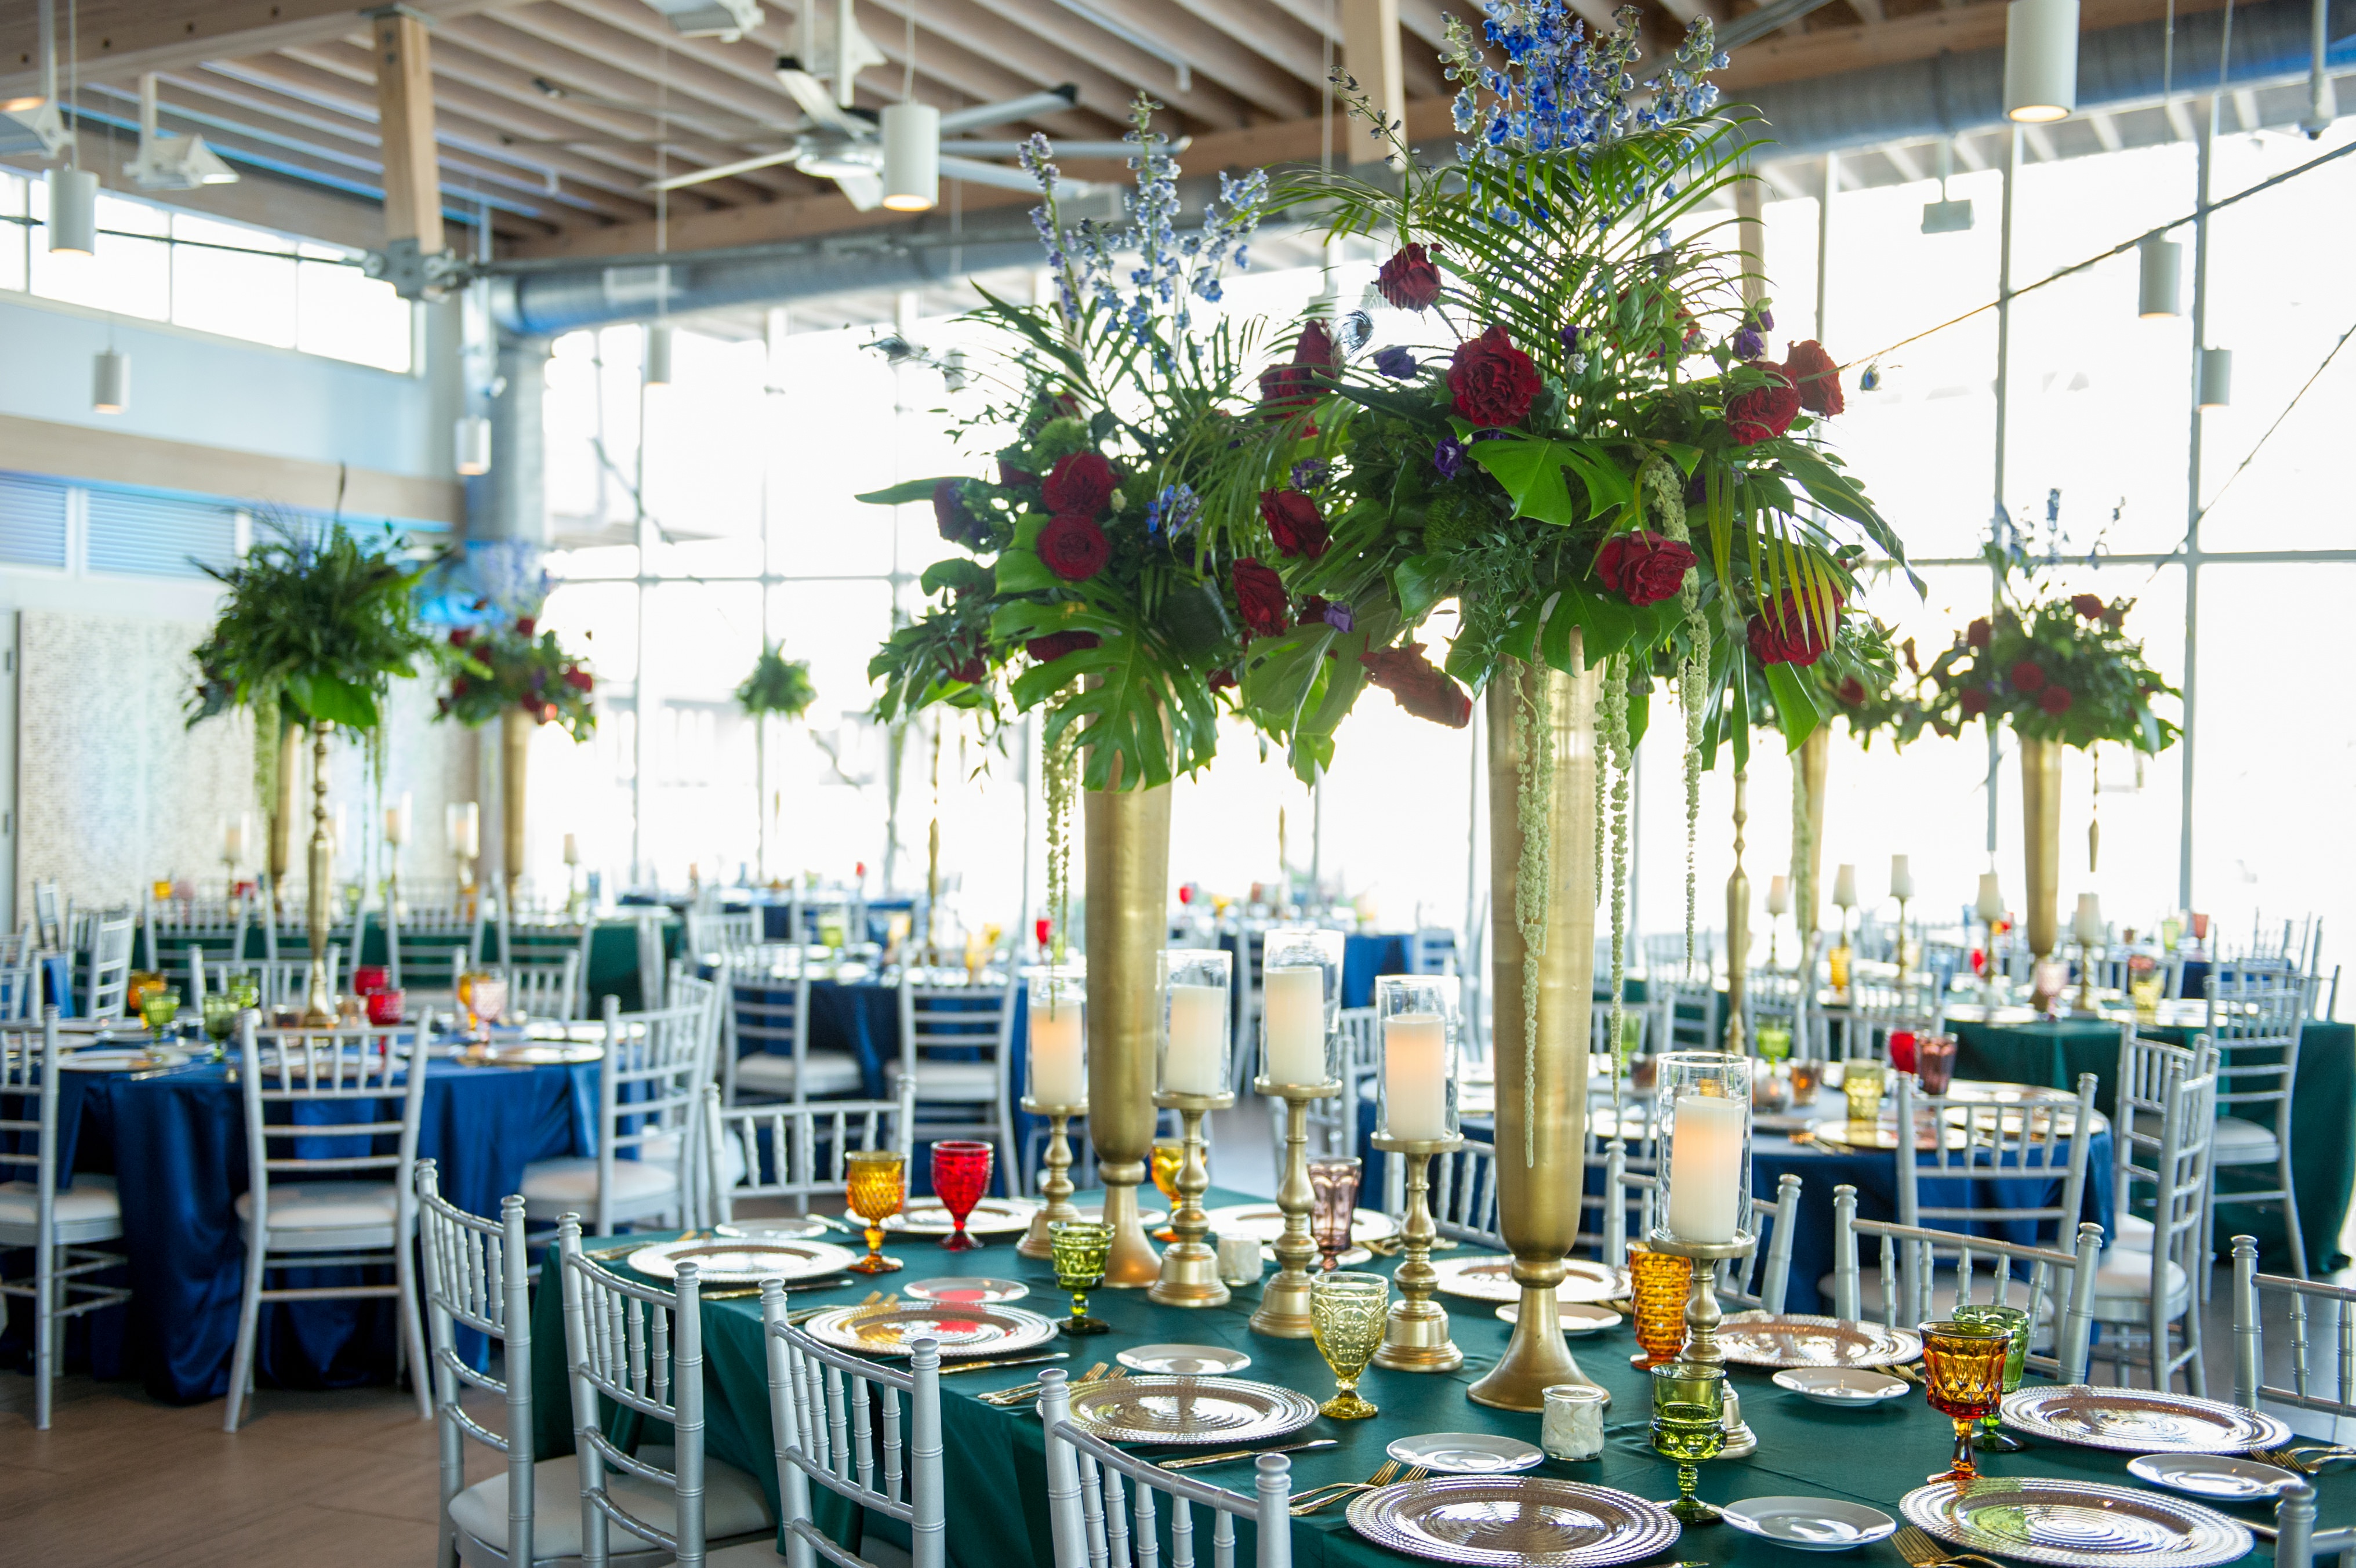 Elegant and Eclectic Jewel Toned Themed Reception Wedding Decor at Downtown Tampa Waterfront Reception Venue Tampa Riverwalk, Floor to Ceiling Windows, Large Gold Vase Centerpieces with Overflowing Green Floral and Red Rose Arrangements | Silk and Velvet Jewel Tone Tablecloths, Vintage Multi-colored Glass Goblets, Gold Flatware, Tall Silver Candelabras | Tampa Bay Wedding Photographer Andi Diamond Photography